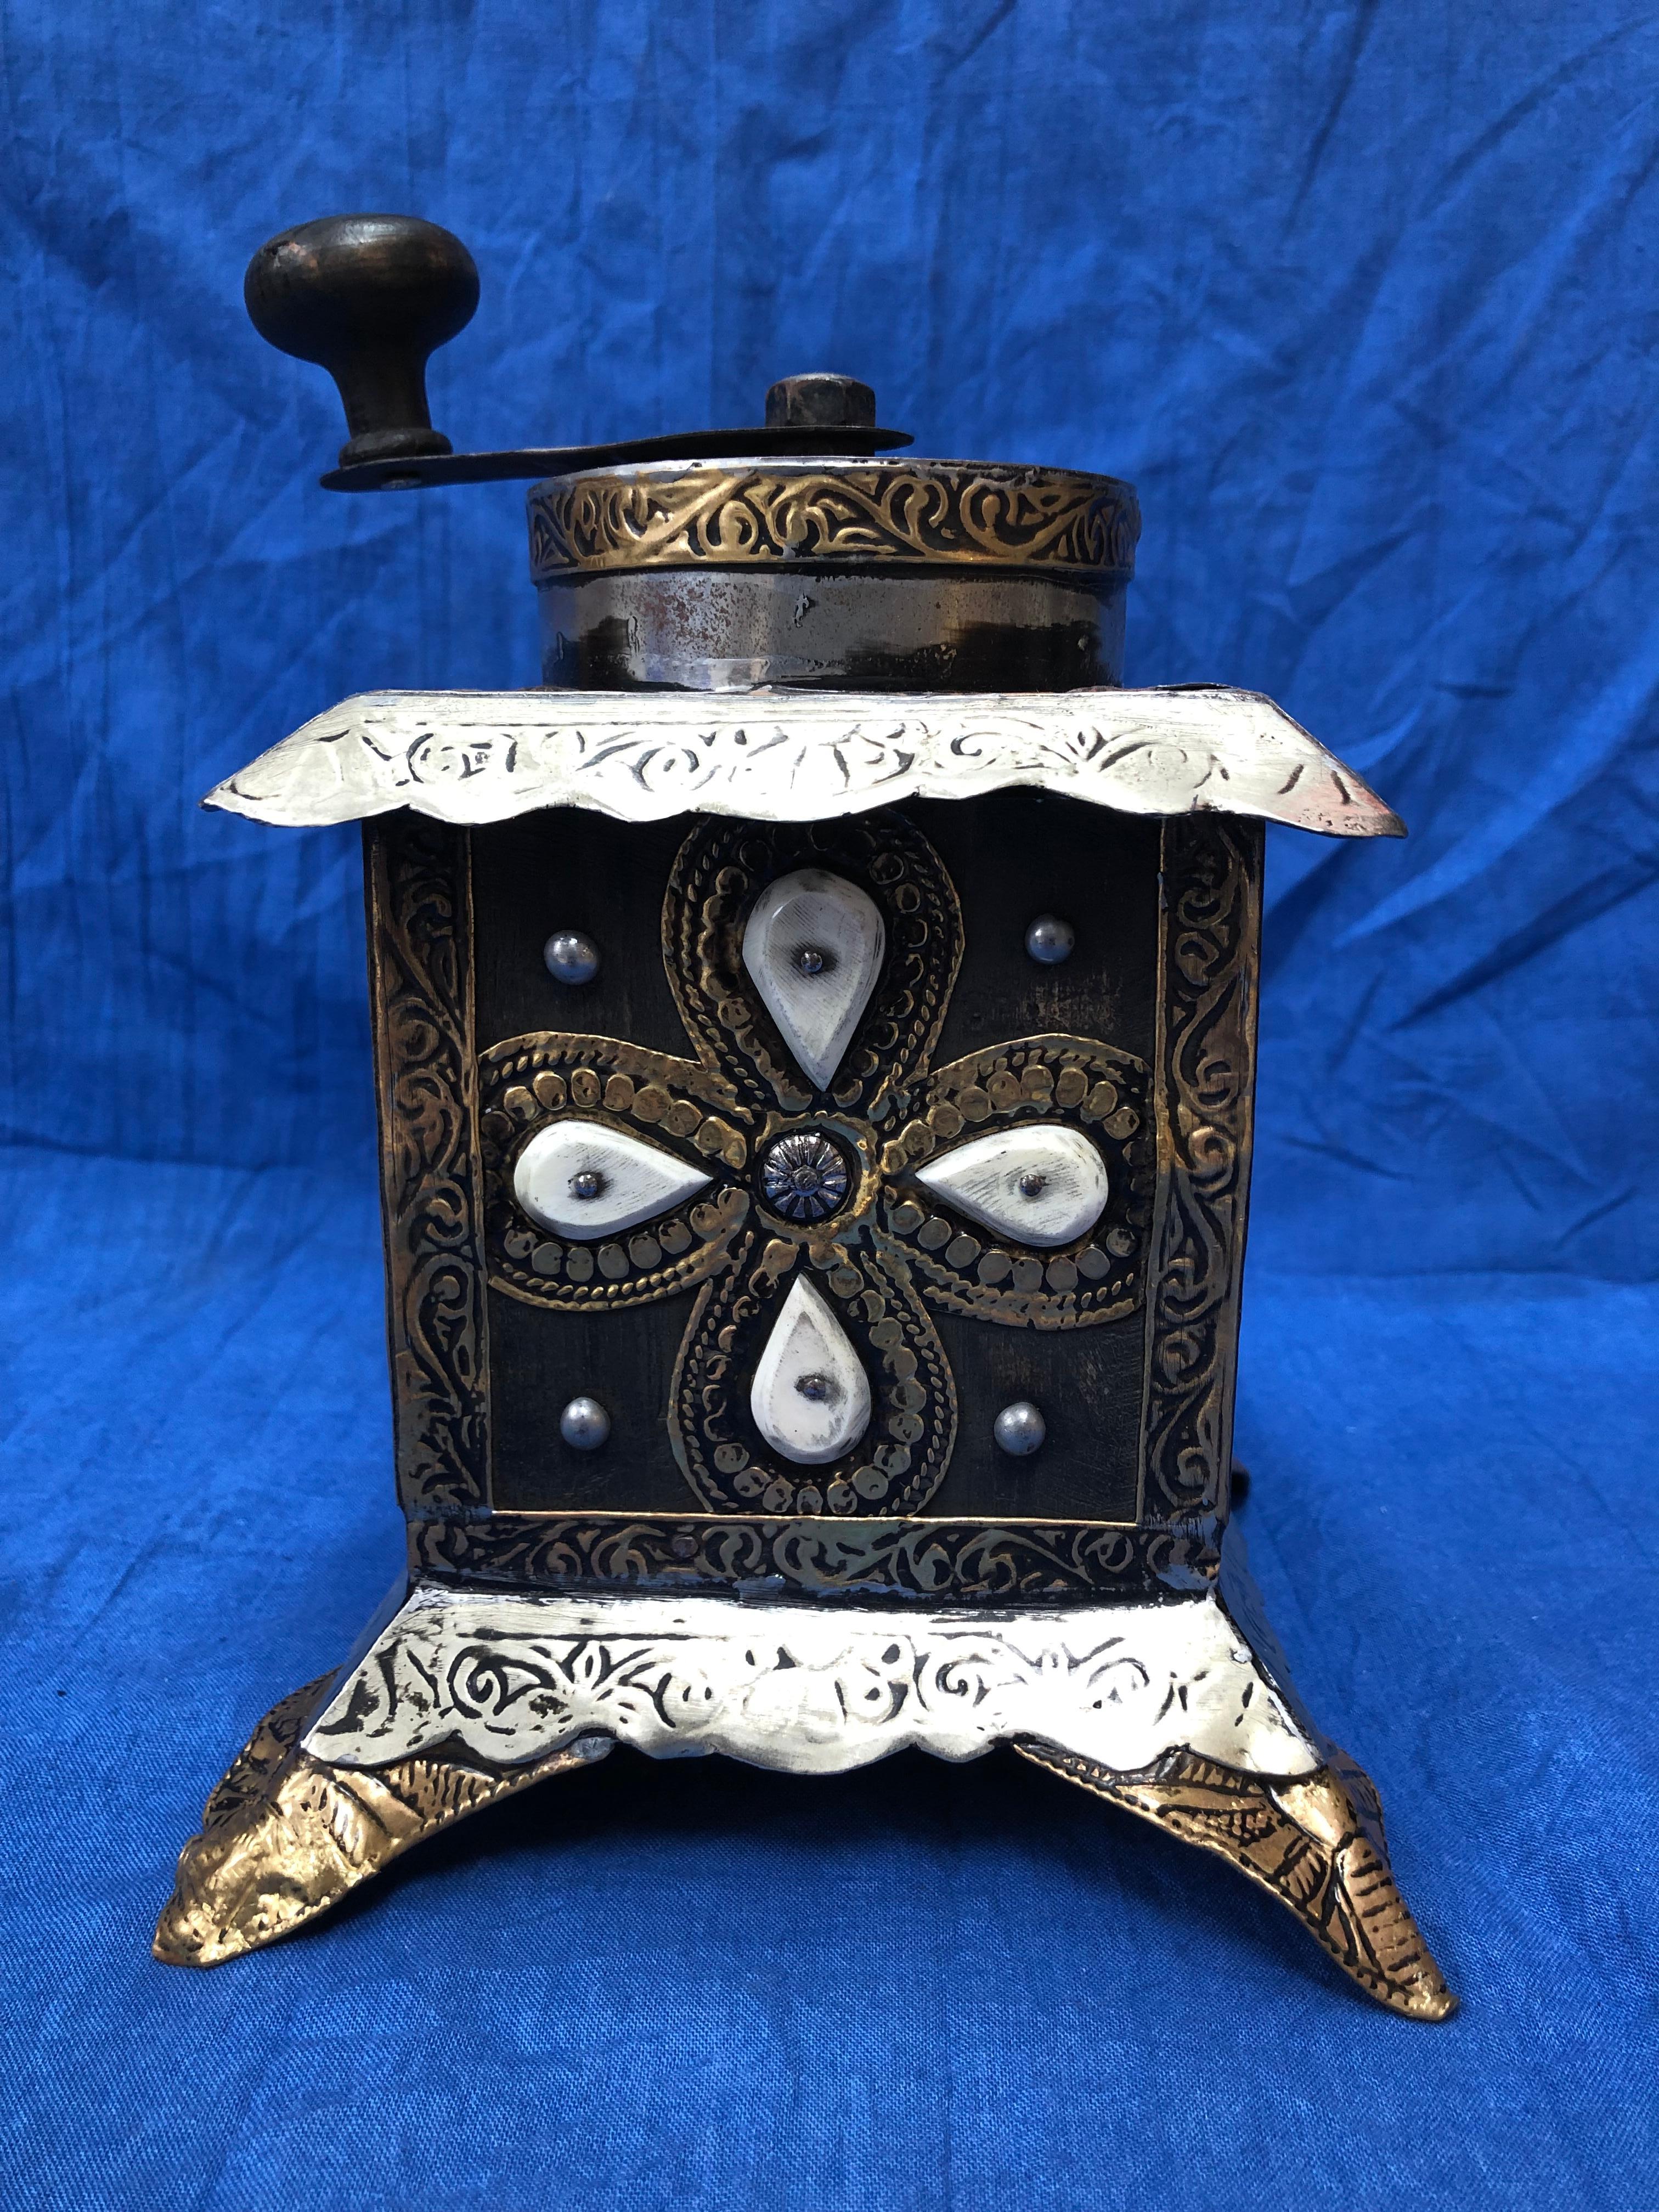 This vintage coffee grinder is made of ebony wood, with hand-engraved silver melange and brass adornment, hand carved camel bone embellishments, and a handhewn grinding mechanism. 

Entirely handmade, this grinder was used by southern Morocco